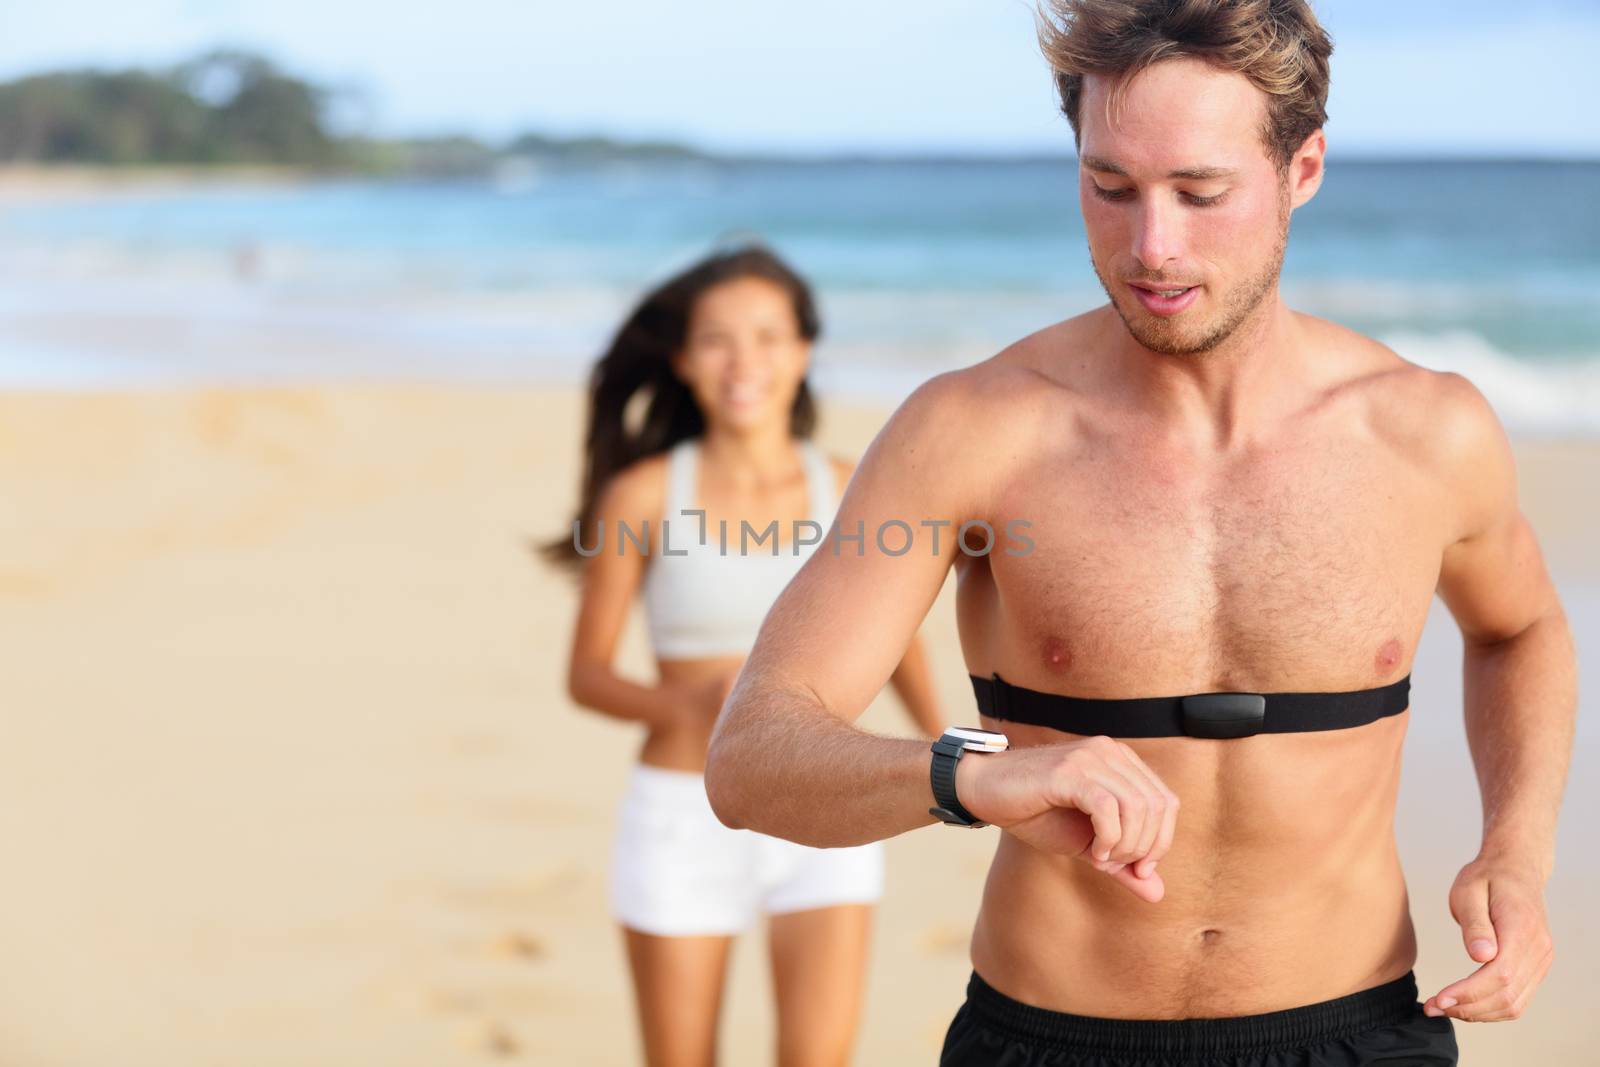 Running young man jogging on beach using heart rate monitor. Handsome shirtless male runner working out outside by the ocean wearing heart rate monitor. Closeup portrait of fit fitness athlete model.